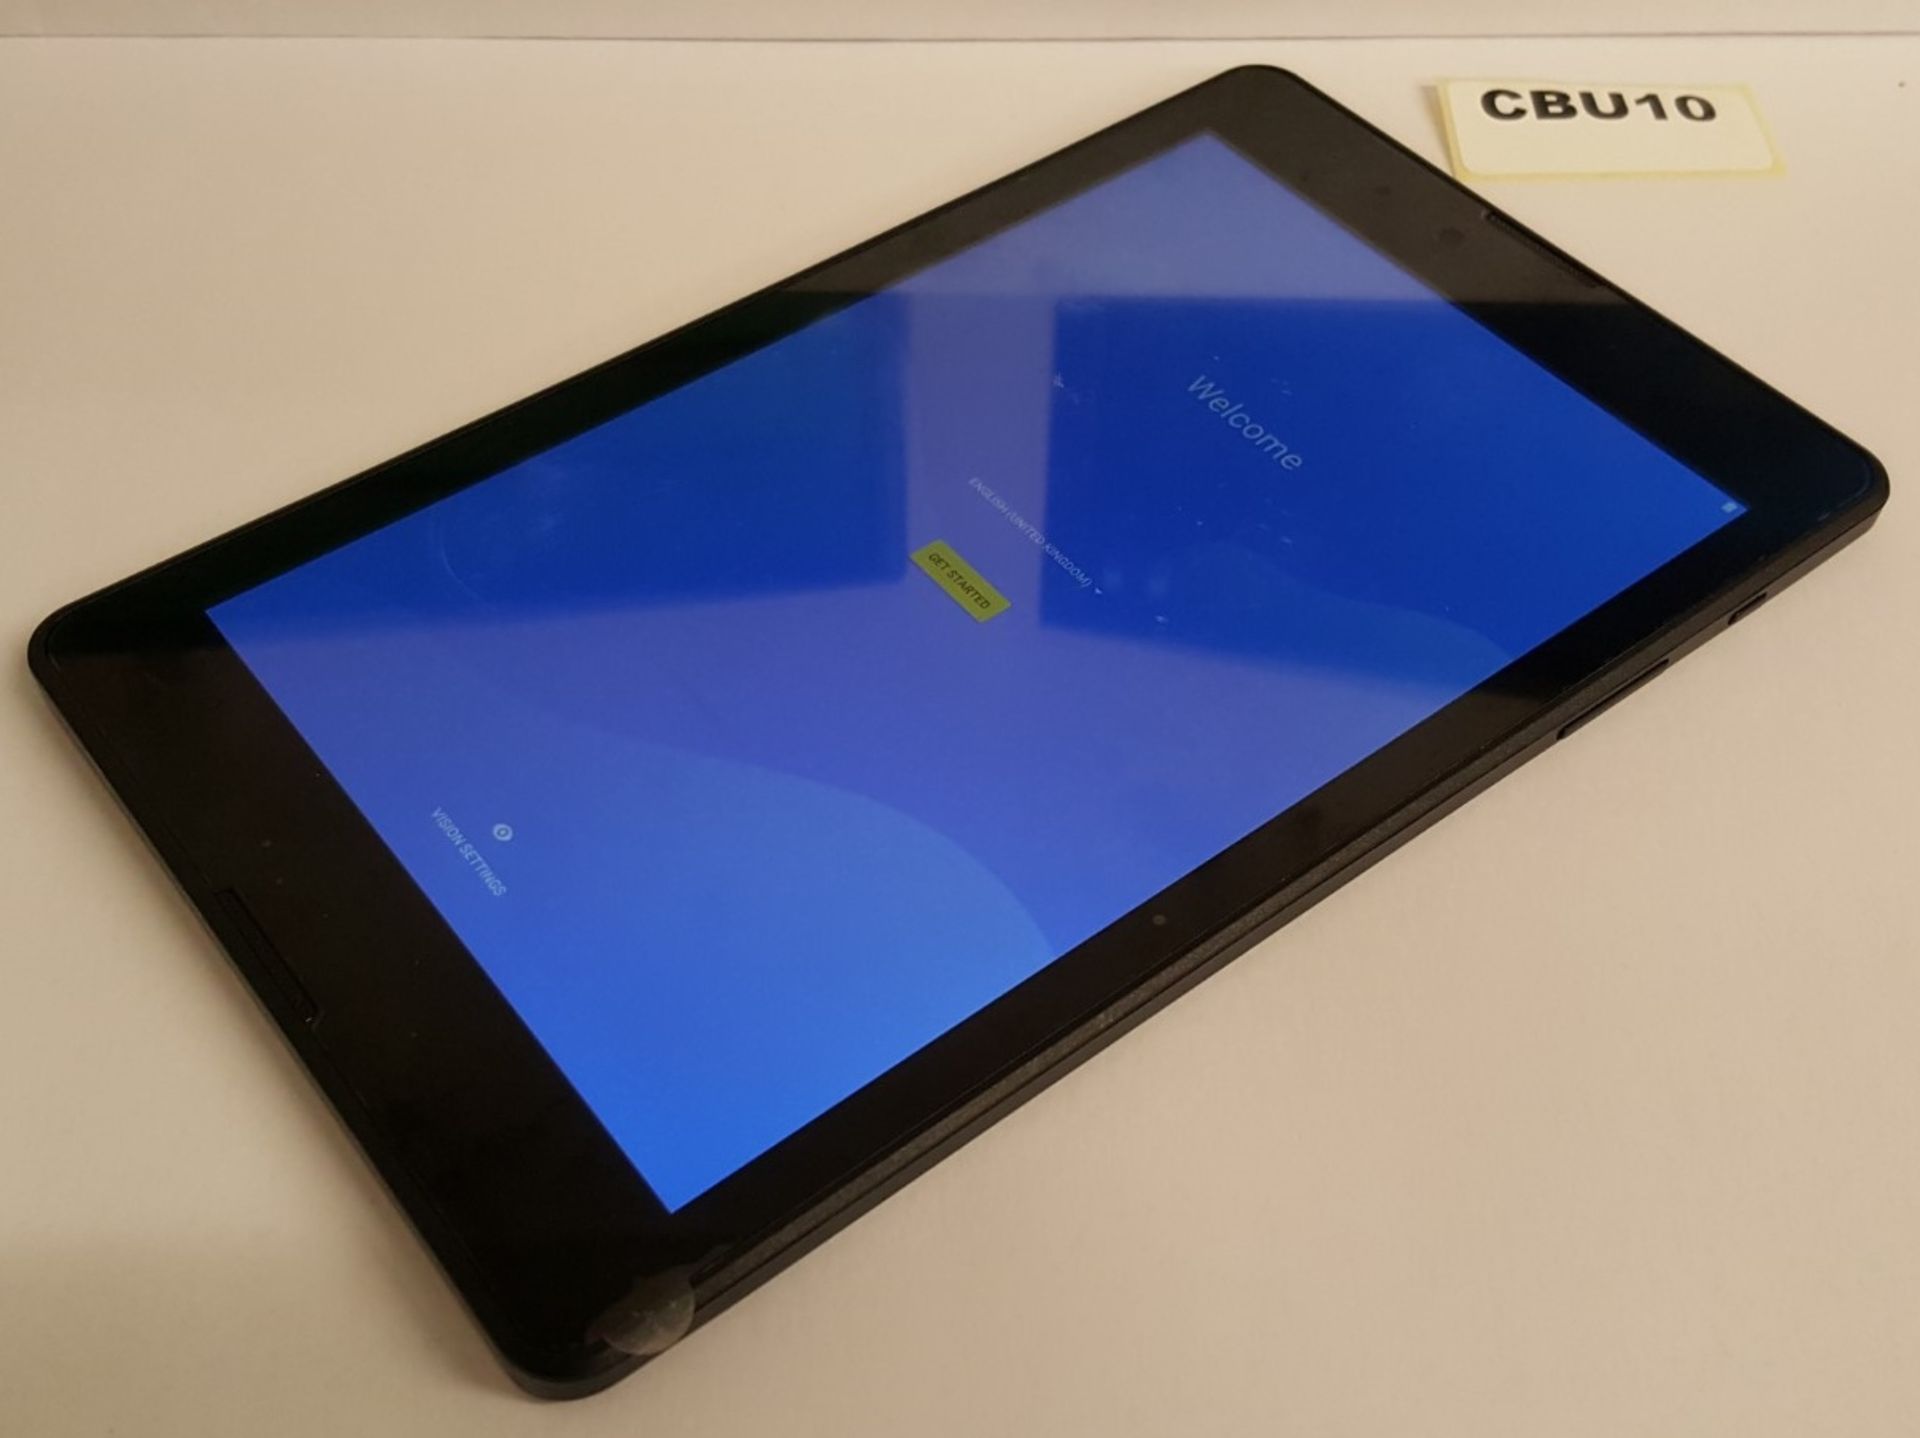 1 x Android SMB-H8009 Tablet - 16GB, WIFI, BLACK, 8.0 " - Ref CBU10 - Image 2 of 3